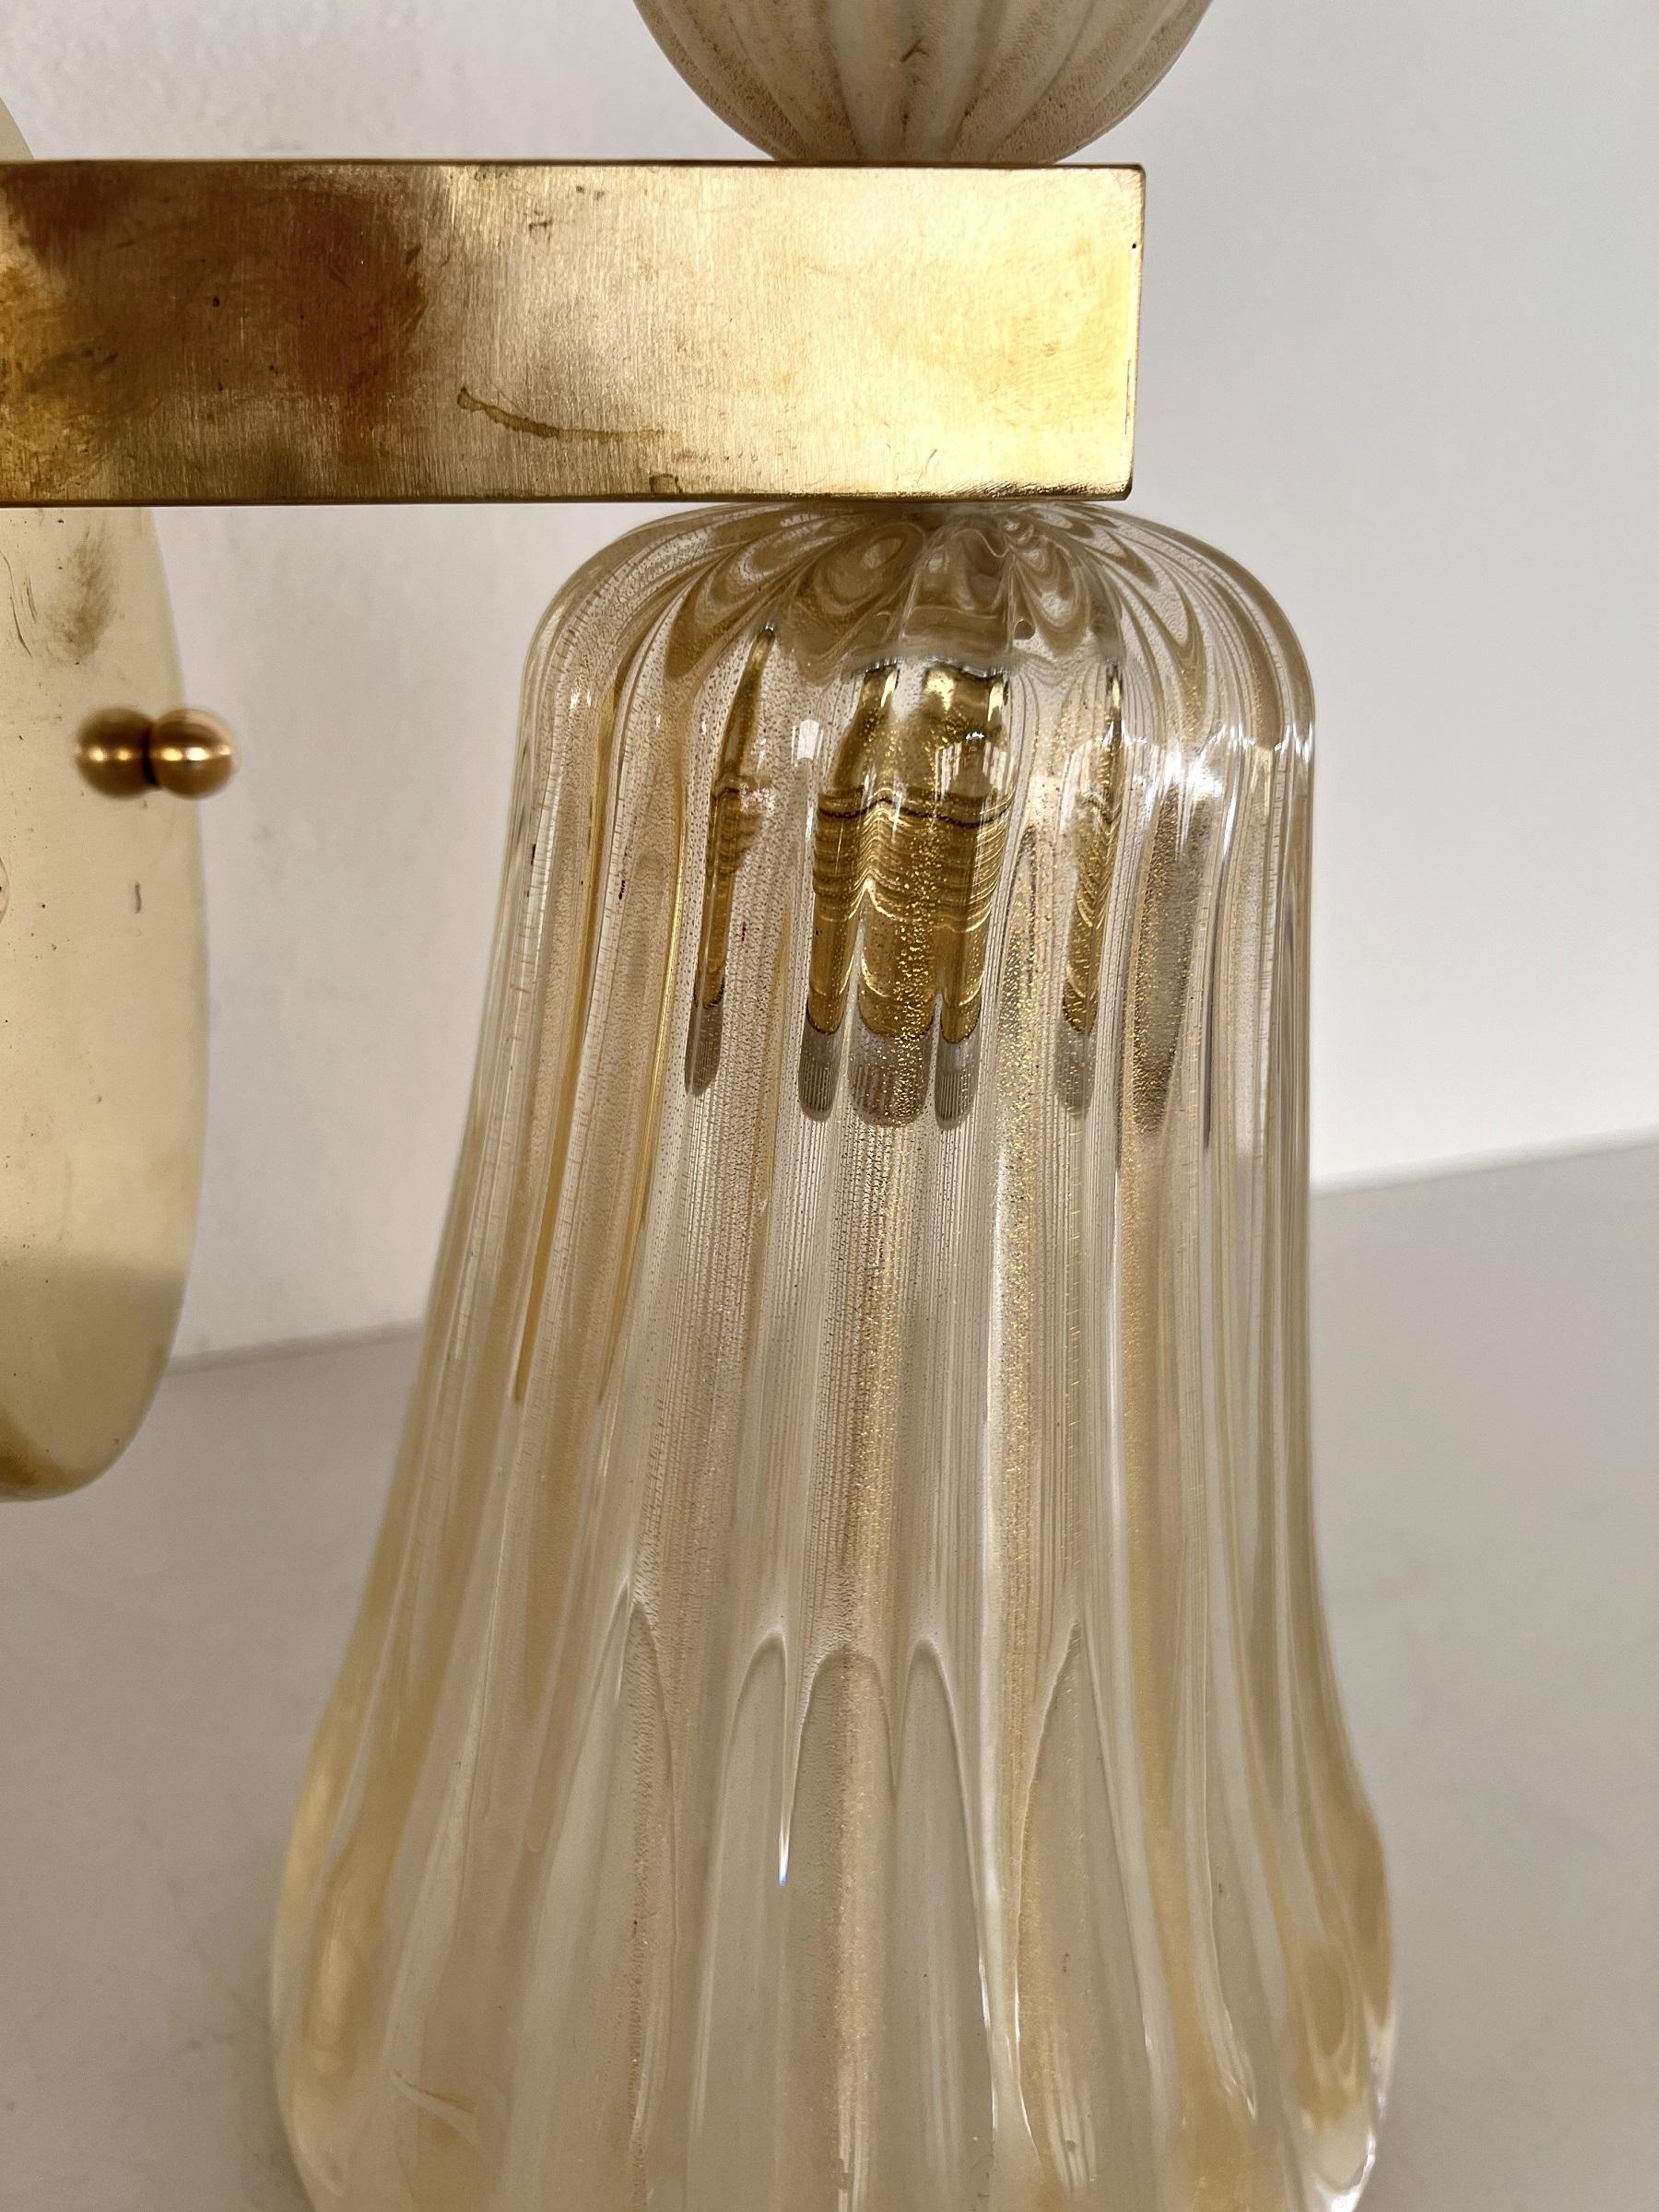 Italian Brass and Murano Glass Wall Lights or Sconces in Art Deco Style, 1990s For Sale 5